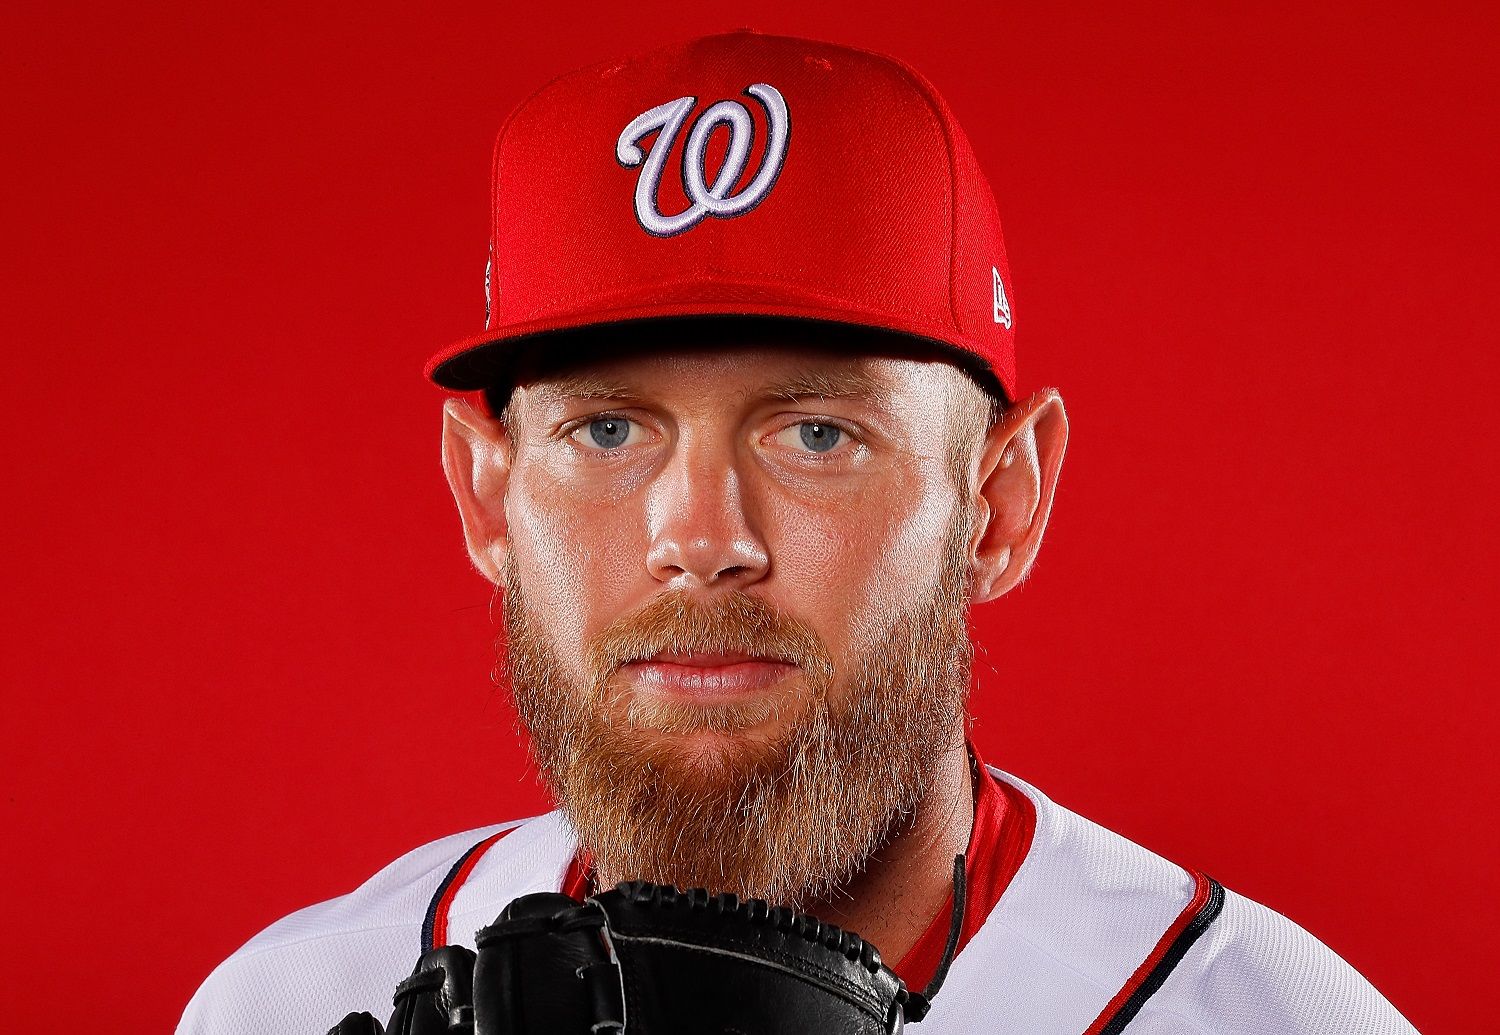 WEST PALM BEACH, FL - FEBRUARY 22:  Stephen Strasburg #37 of the Washington Nationals poses for a photo during photo days at The Ballpark of the Palm Beaches on February 22, 2018 in West Palm Beach, Florida.  (Photo by Kevin C. Cox/Getty Images)